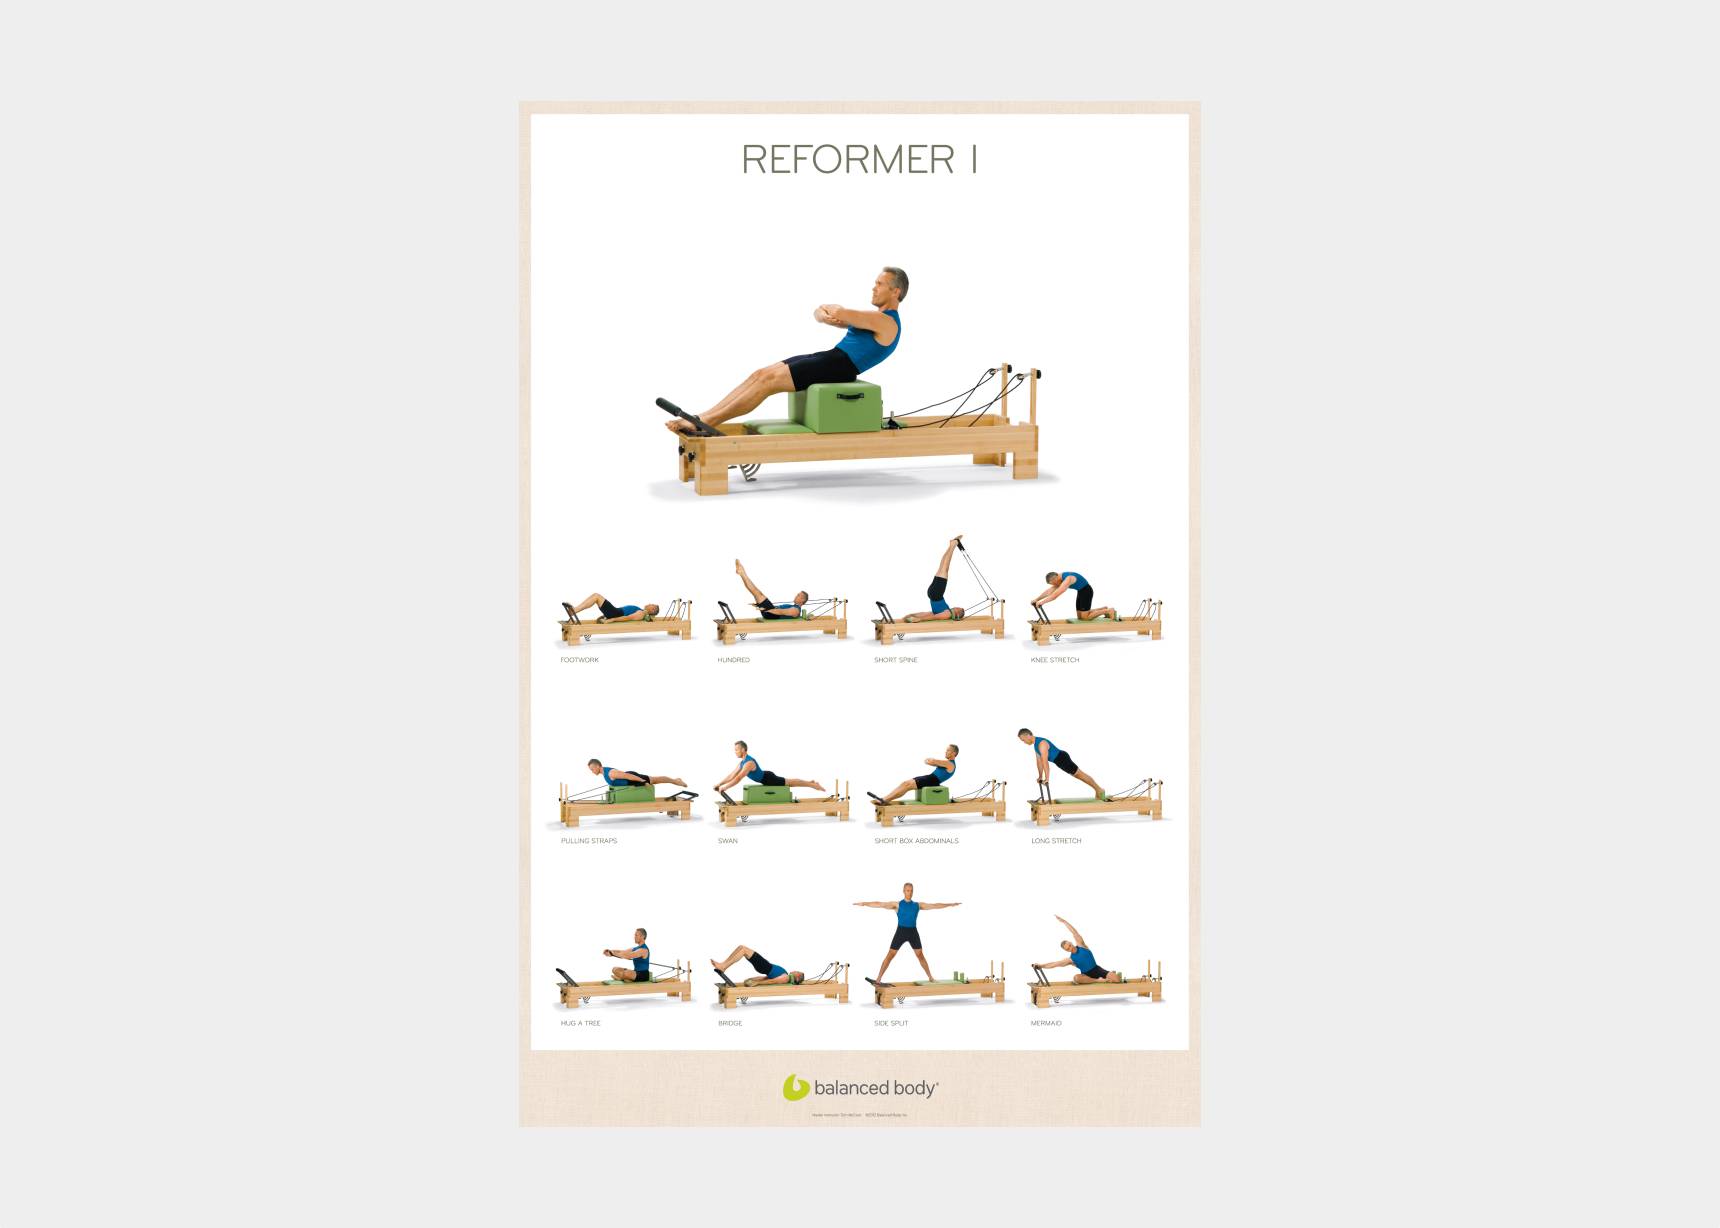 Balanced Body Reformer II Poster, Educational Guide Pictures, Exercise  Positions Wall Chart for Pilates Studio, 24 x 36 Inches